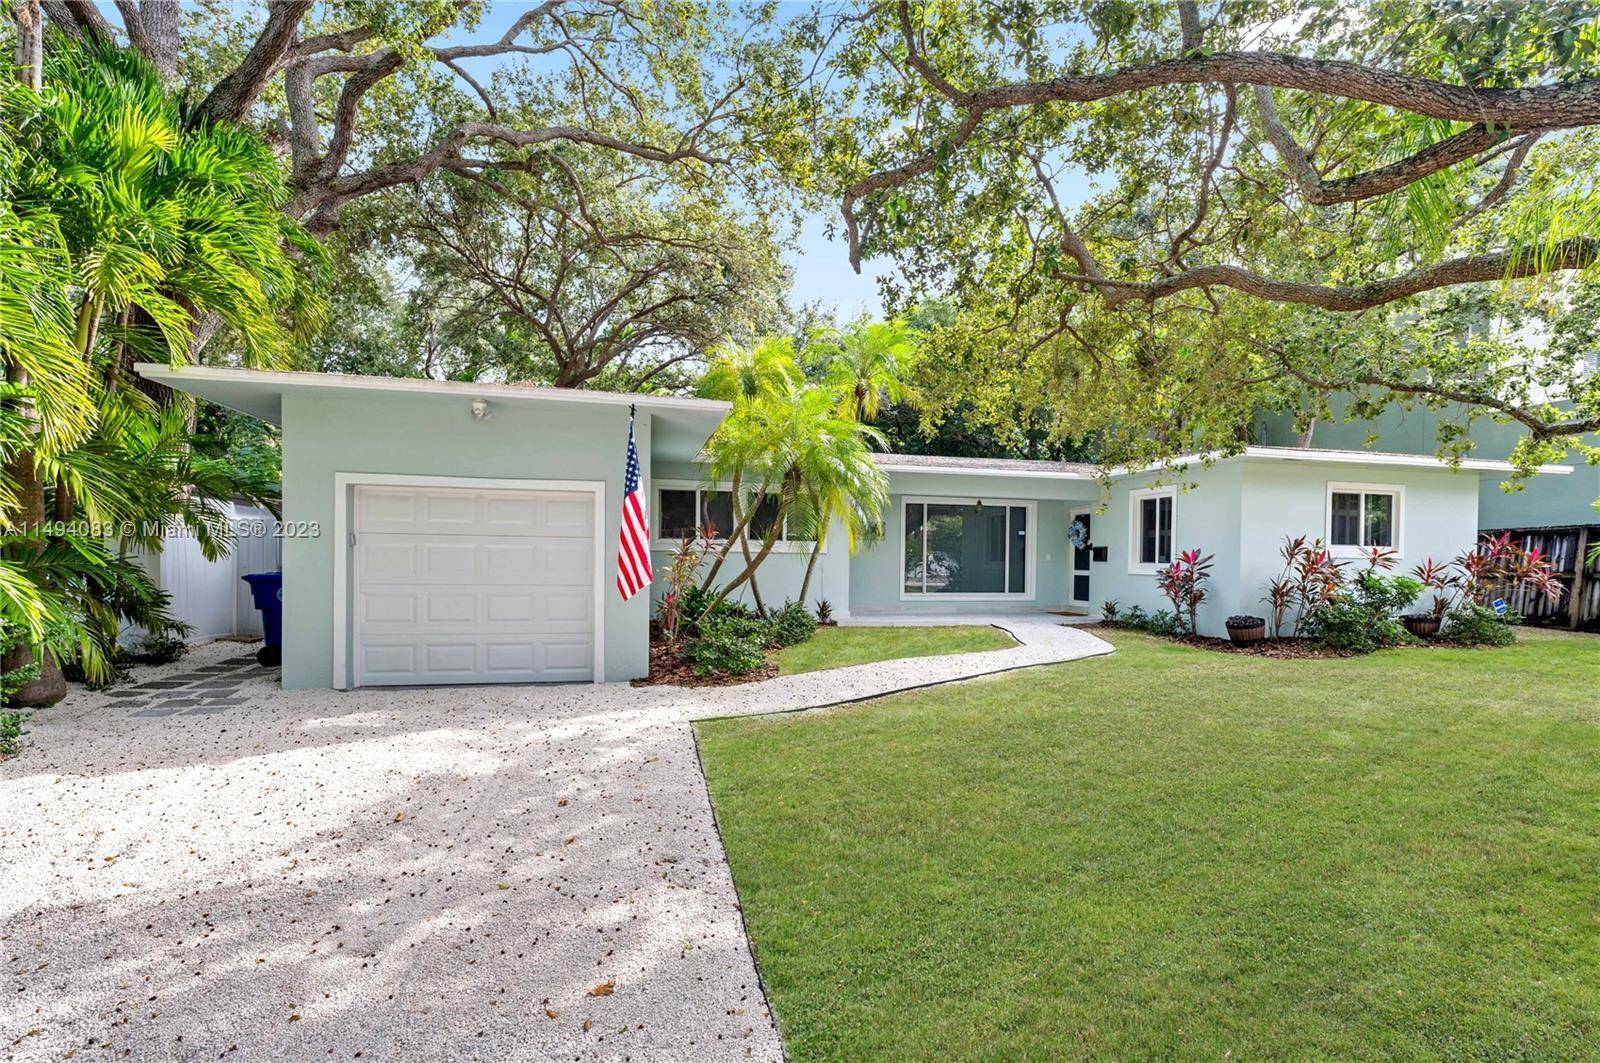 Nestled in the iconic Coconut Grove, this fully remodeled home offers 3 bedrooms, a versatile den or office, and two bathrooms.